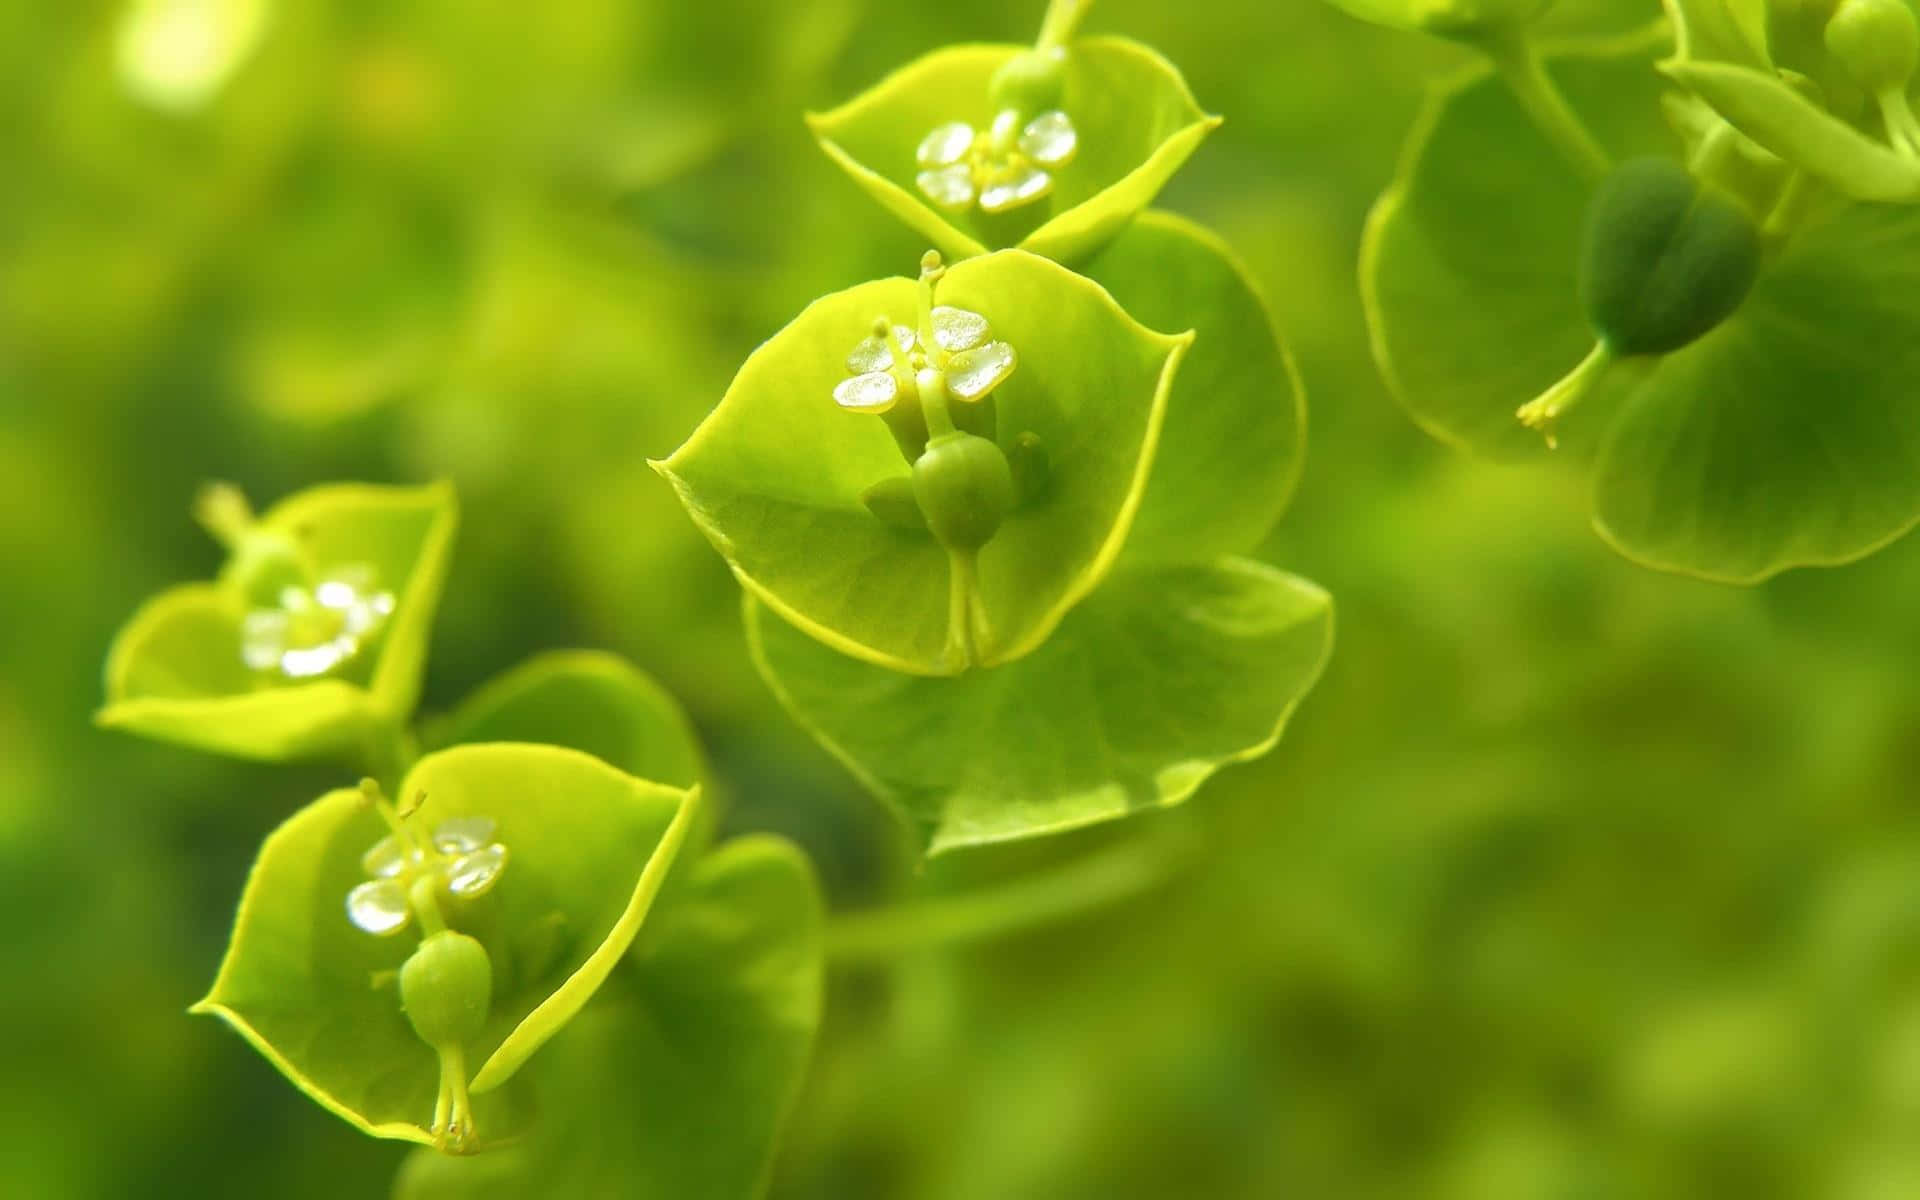 Bright Green Flower Gives a Glowing Look to this Plant Life